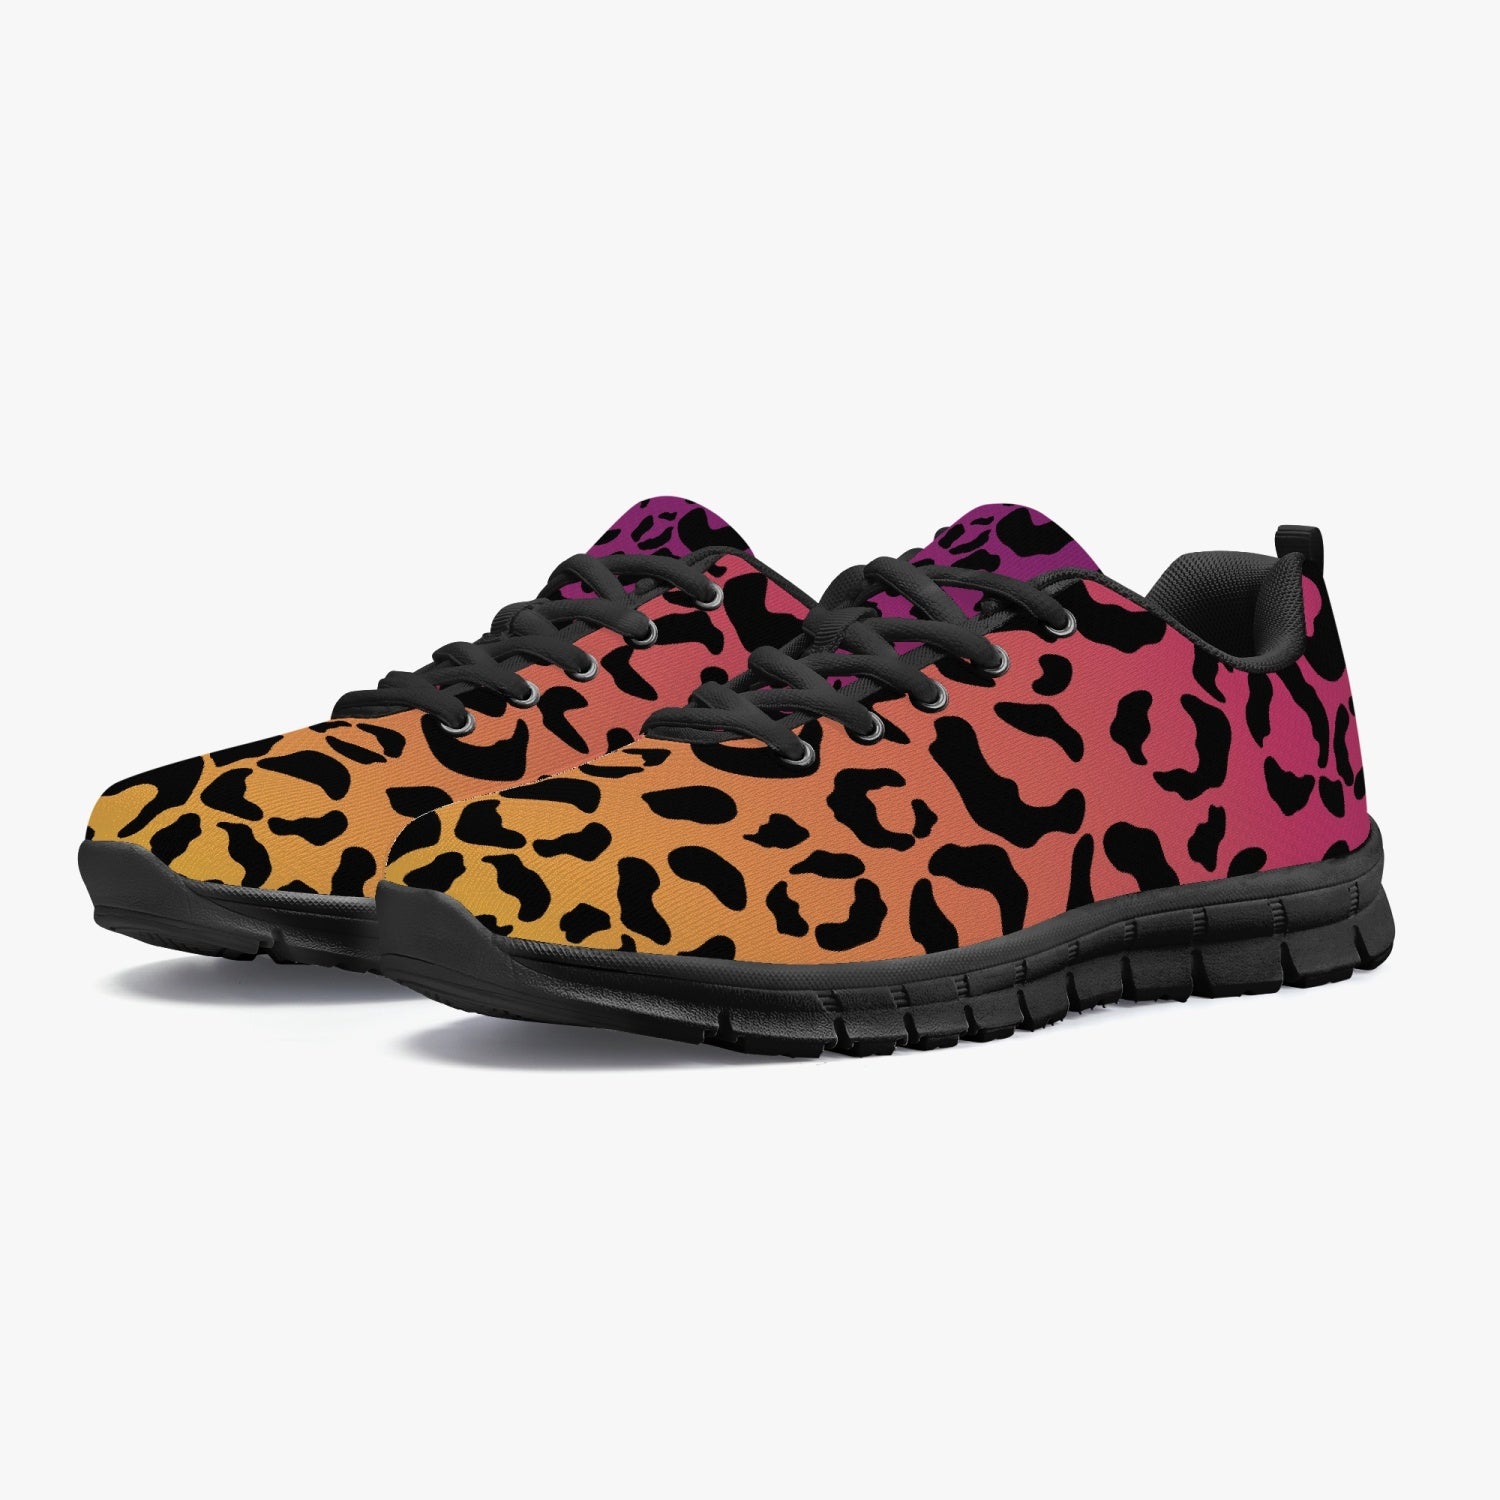 Women's Red Yellow Leopard Cheetah Print Workout Gym Running Sneakers Overview